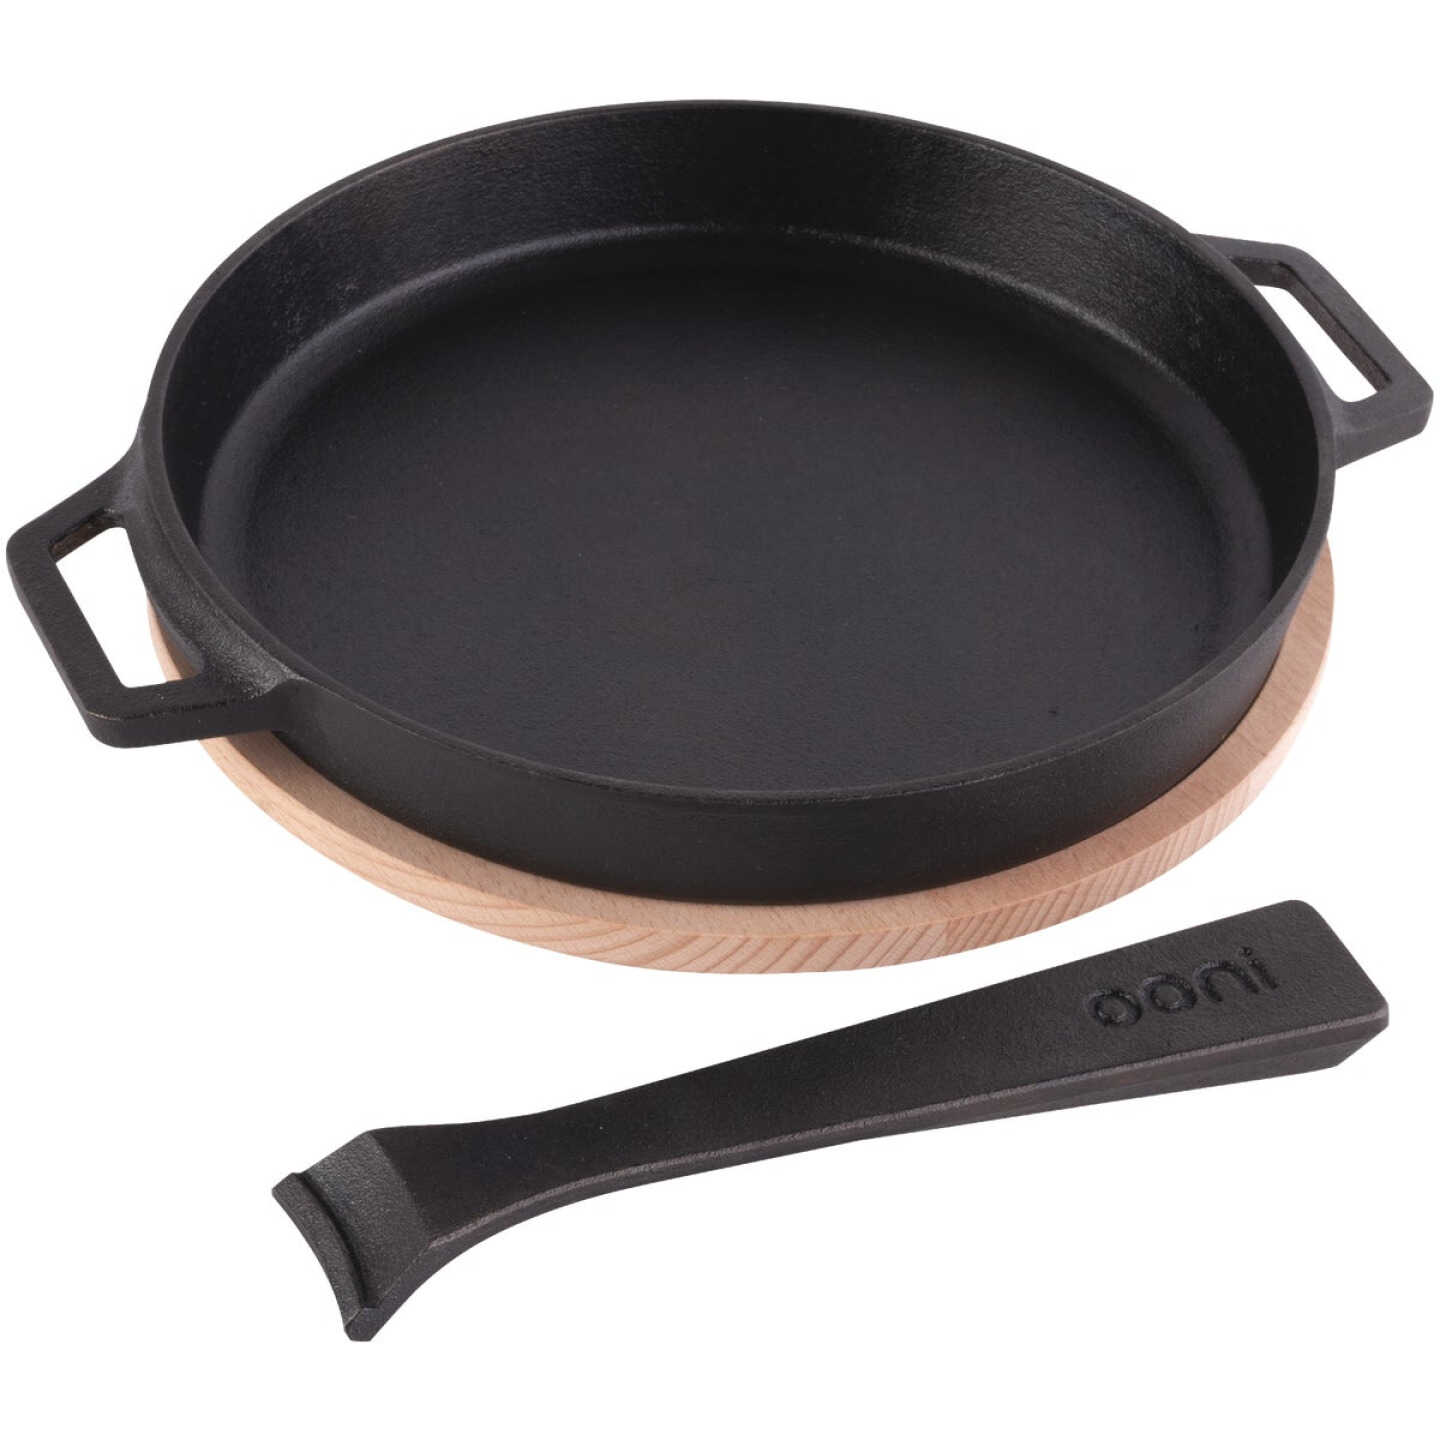 OONI CAST IRON GRIZZLER PAN  Review - Chicken Fajitas First Cook on Karu  16 